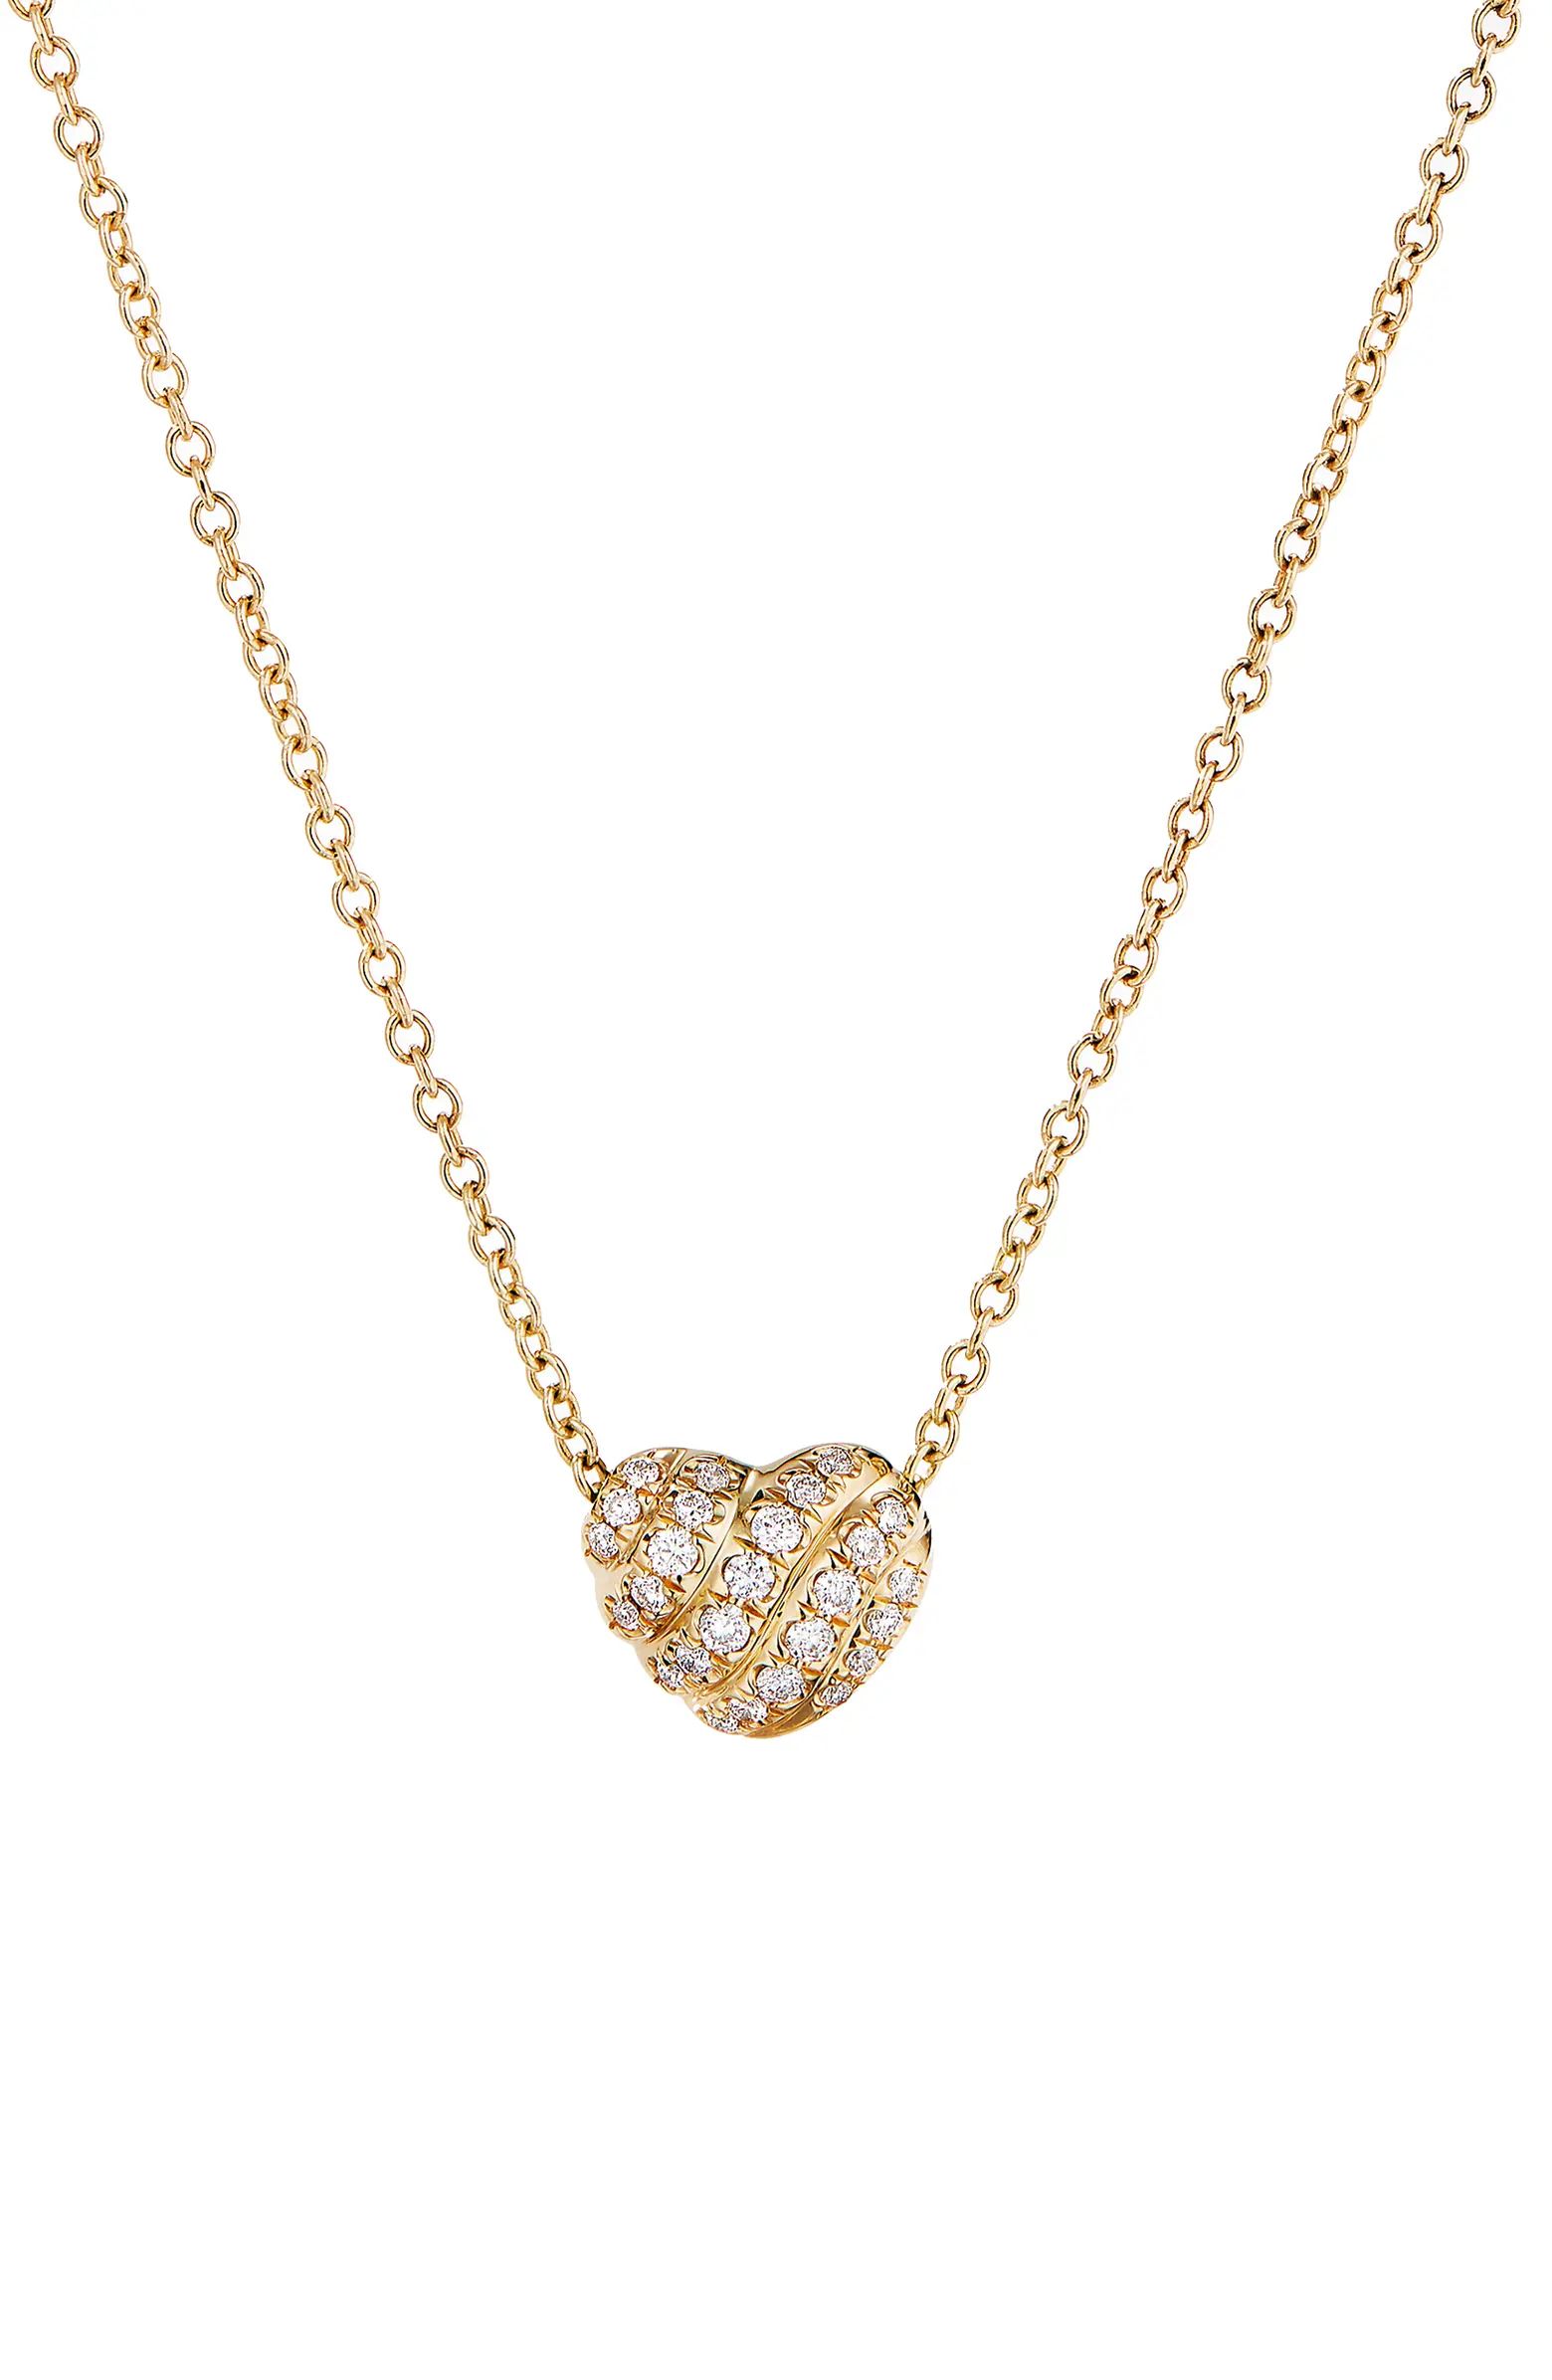 Heart Pendant Necklace in 18K Gold with Pavé Diamonds | Nordstrom